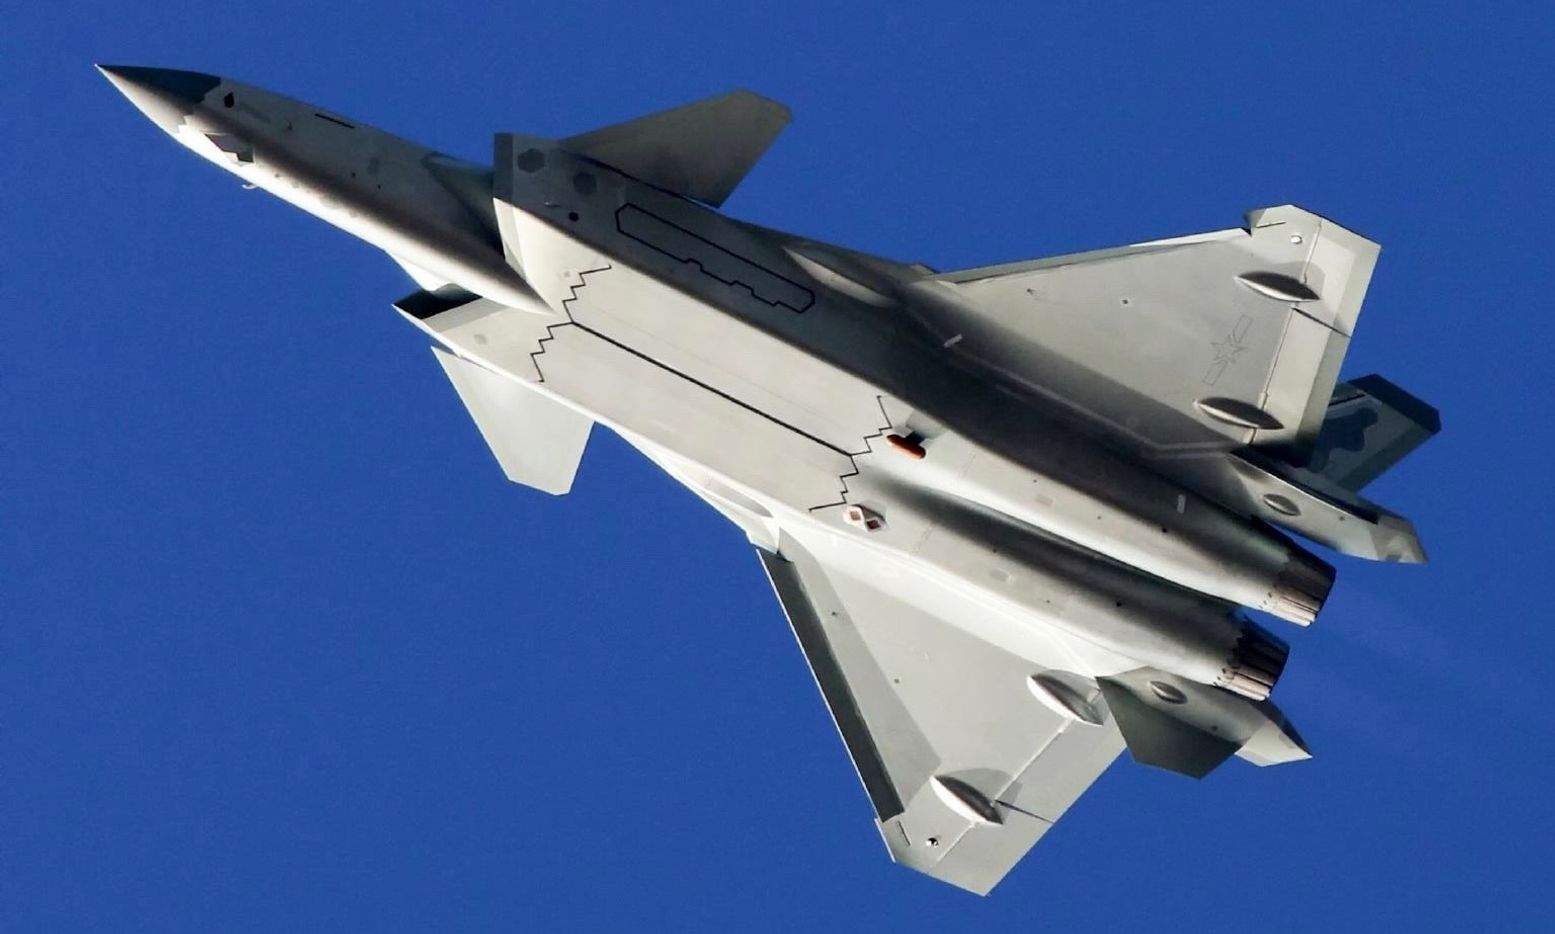 No Stealth for You: India Says It Can 'Track' China's New ...